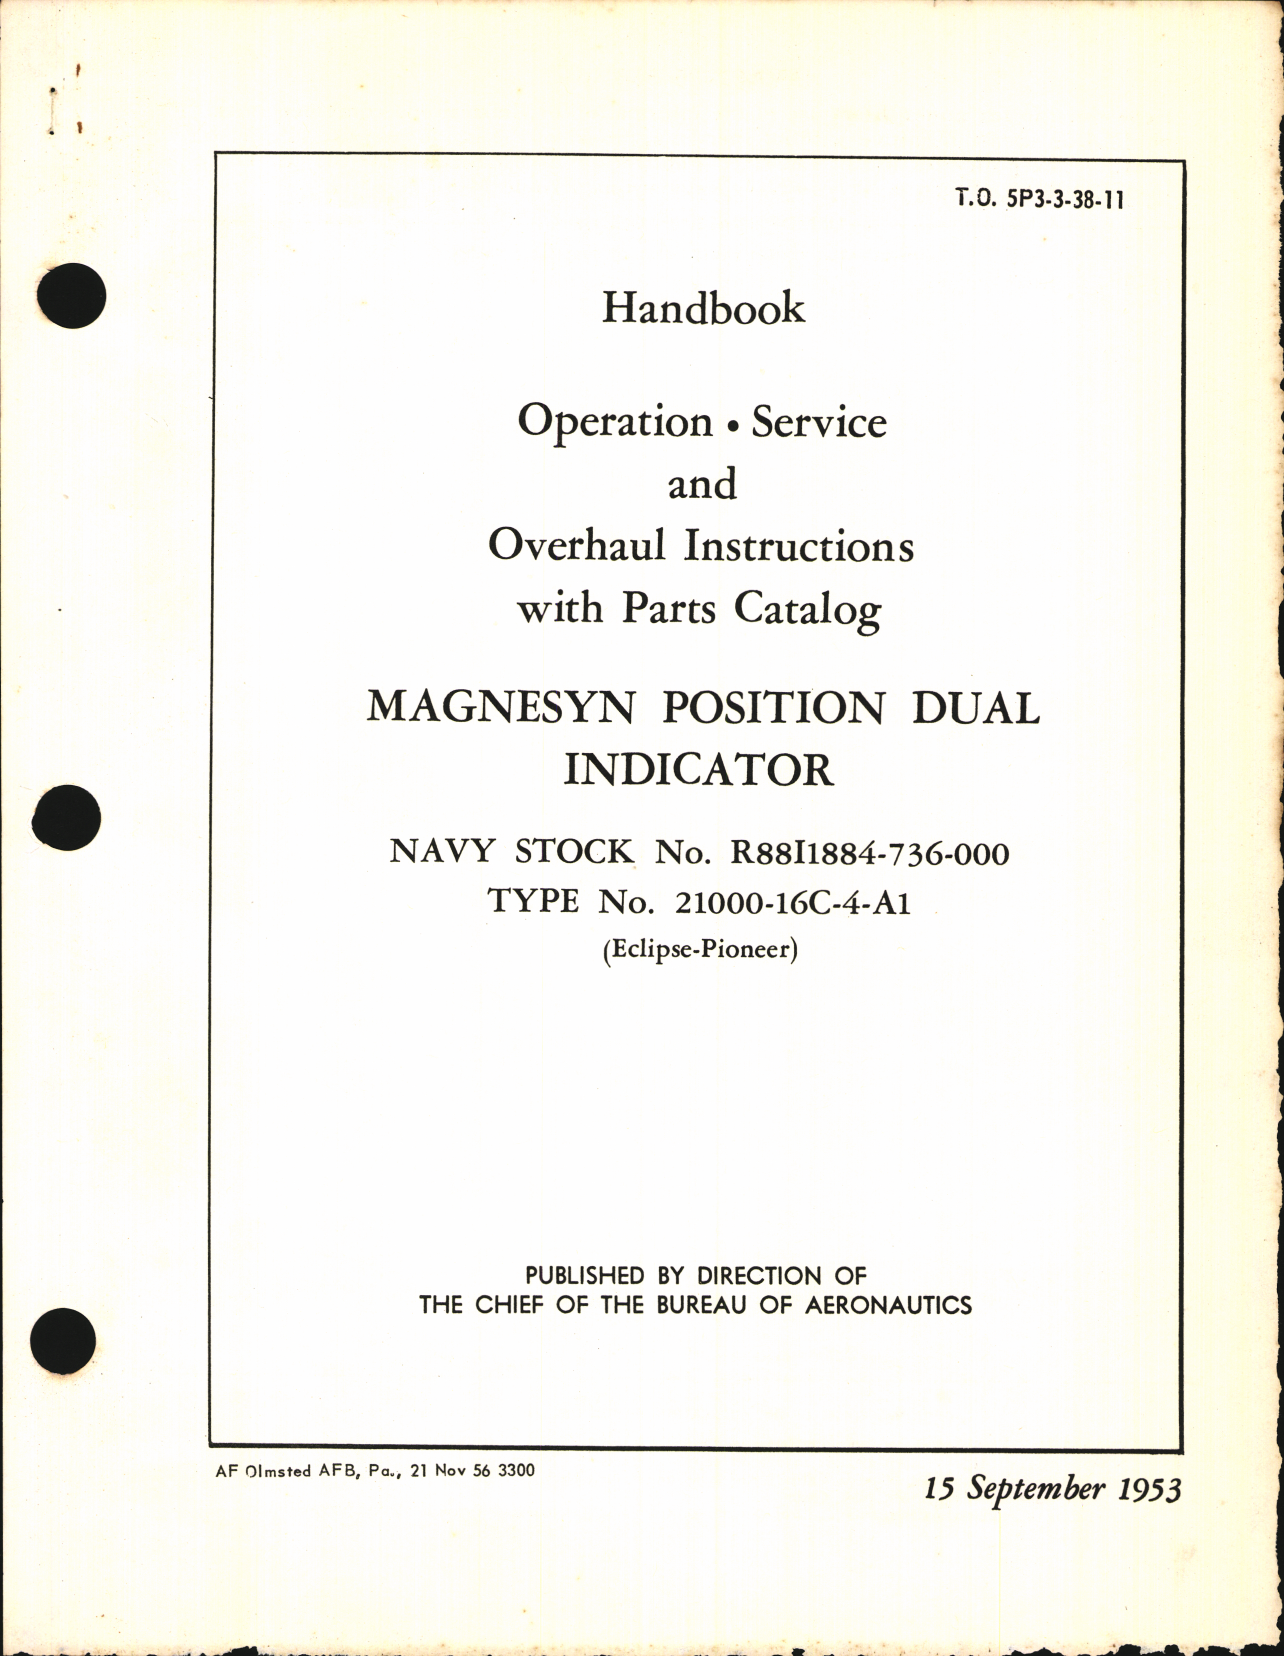 Sample page 1 from AirCorps Library document: Operation, Service, & Overhaul Inst w/ Parts Catalog for Magnesyn Position Dual Indicator